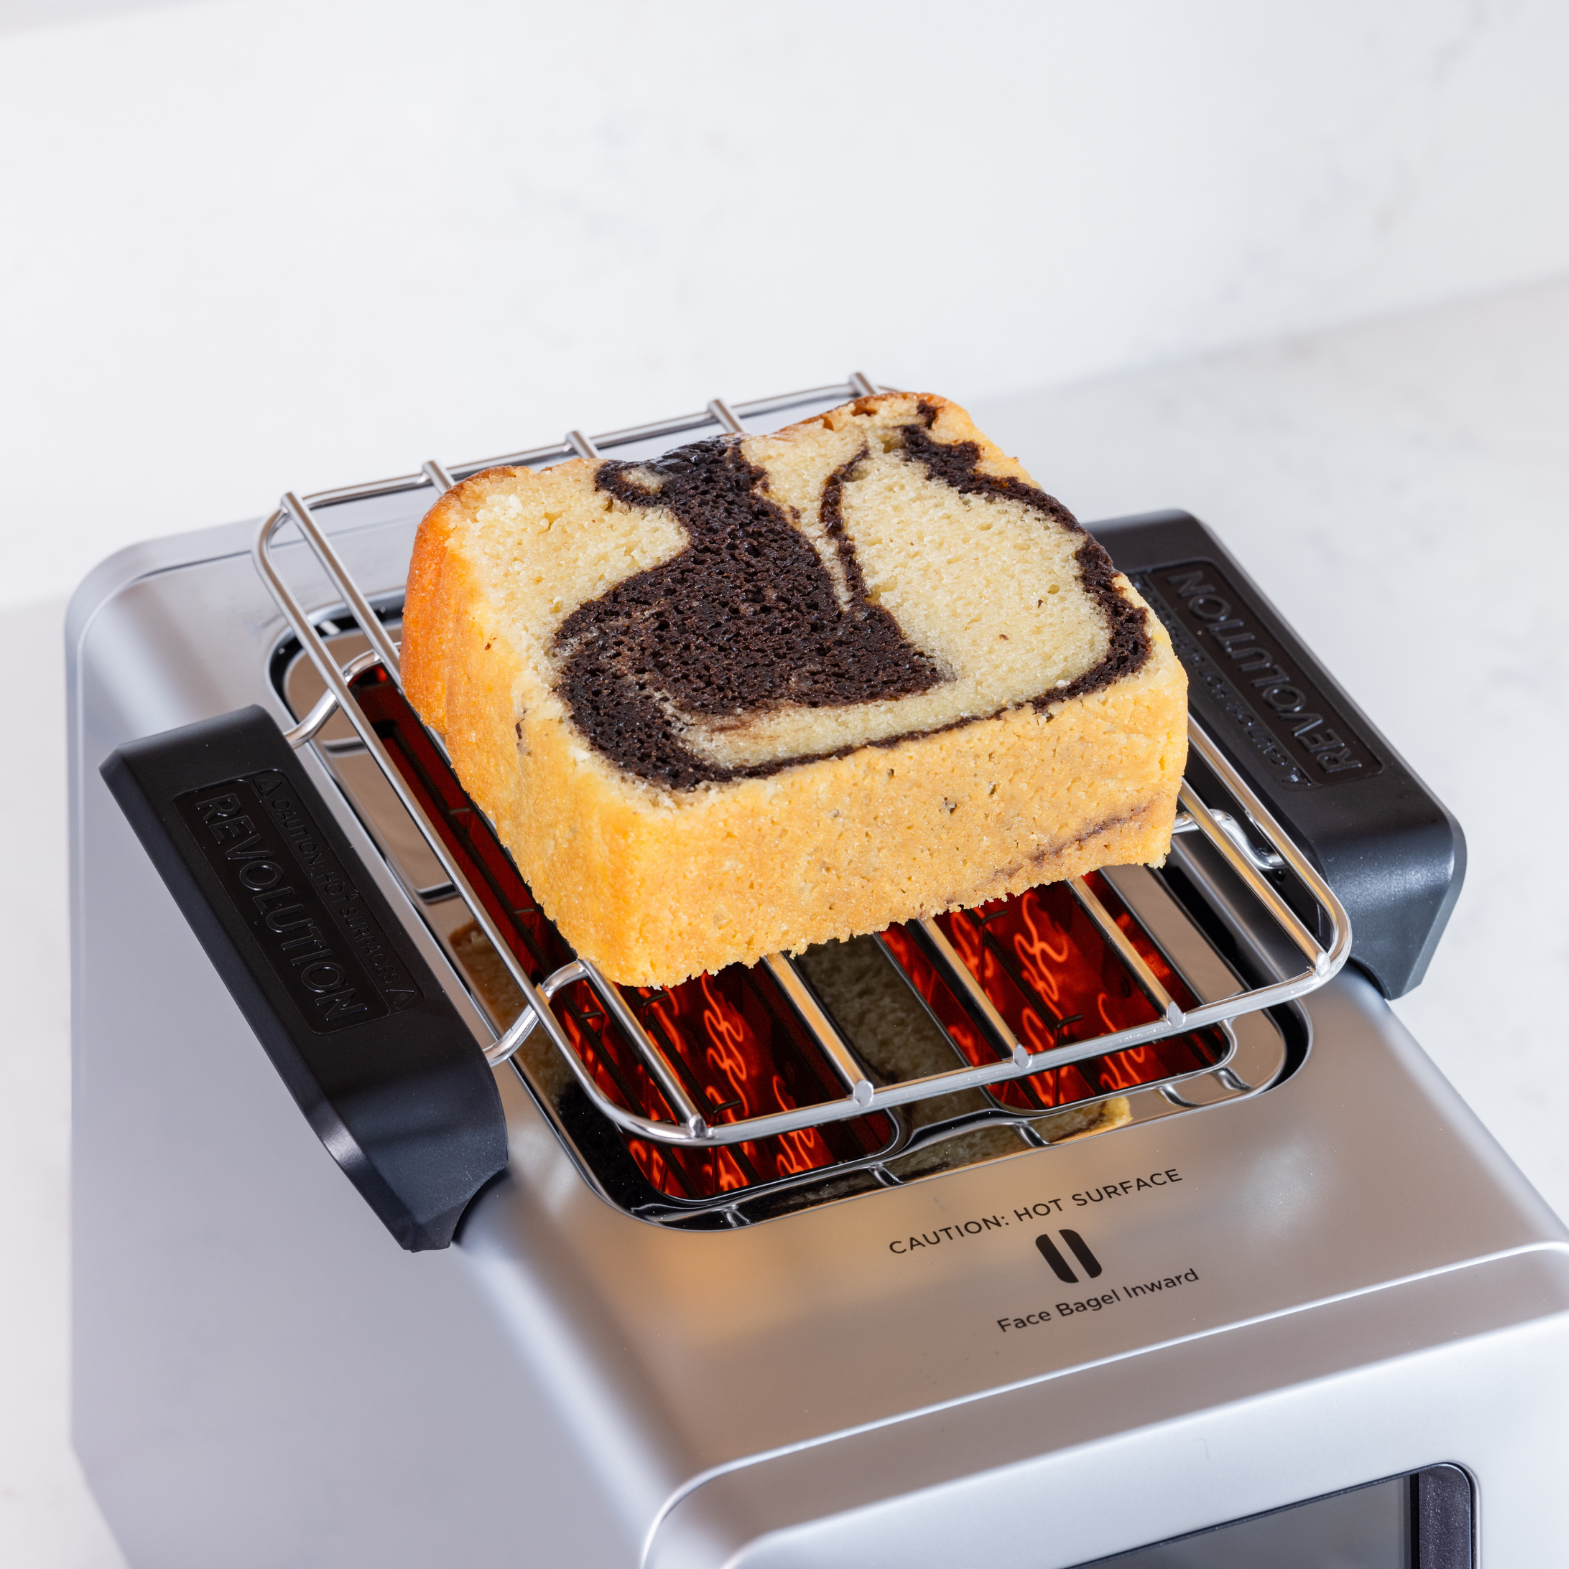 Warming Rack for Revolution InstaGLO Toasters